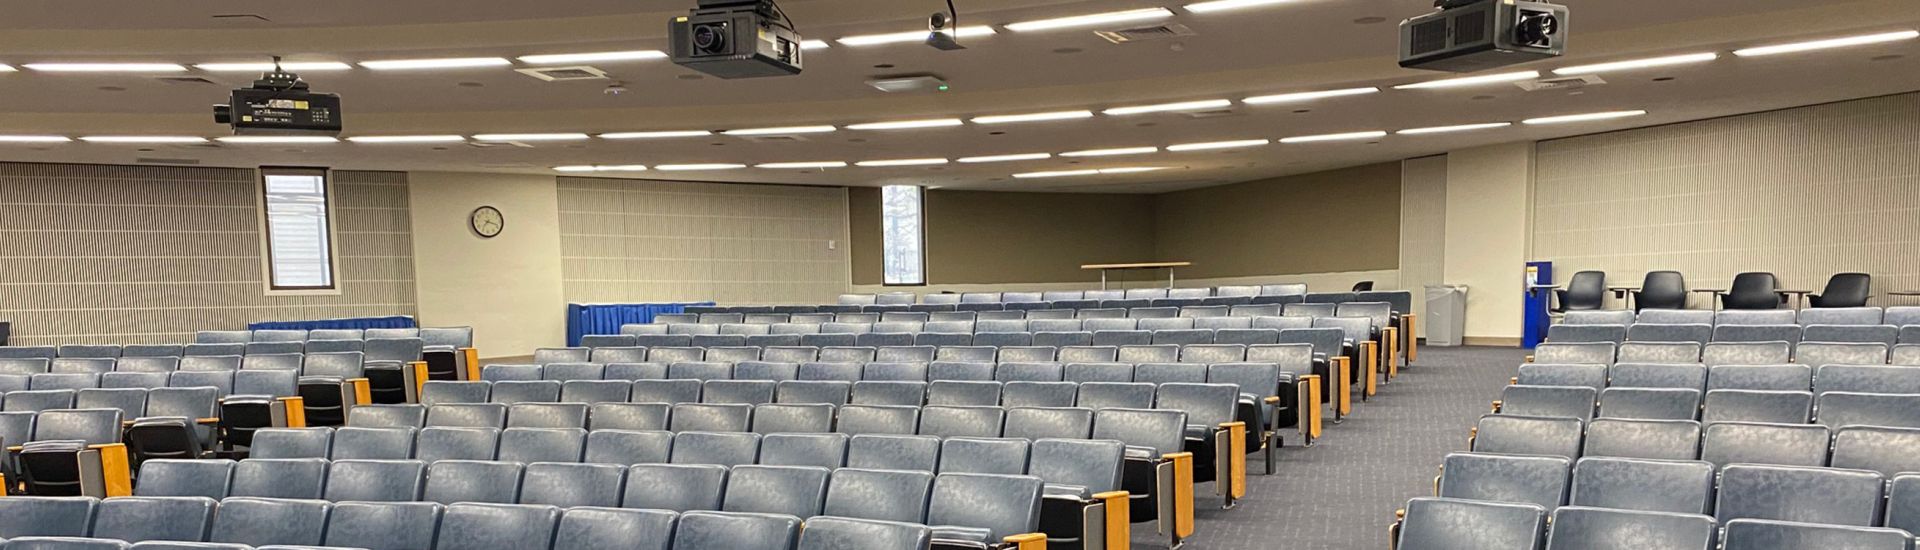 Seats in a lecture hall